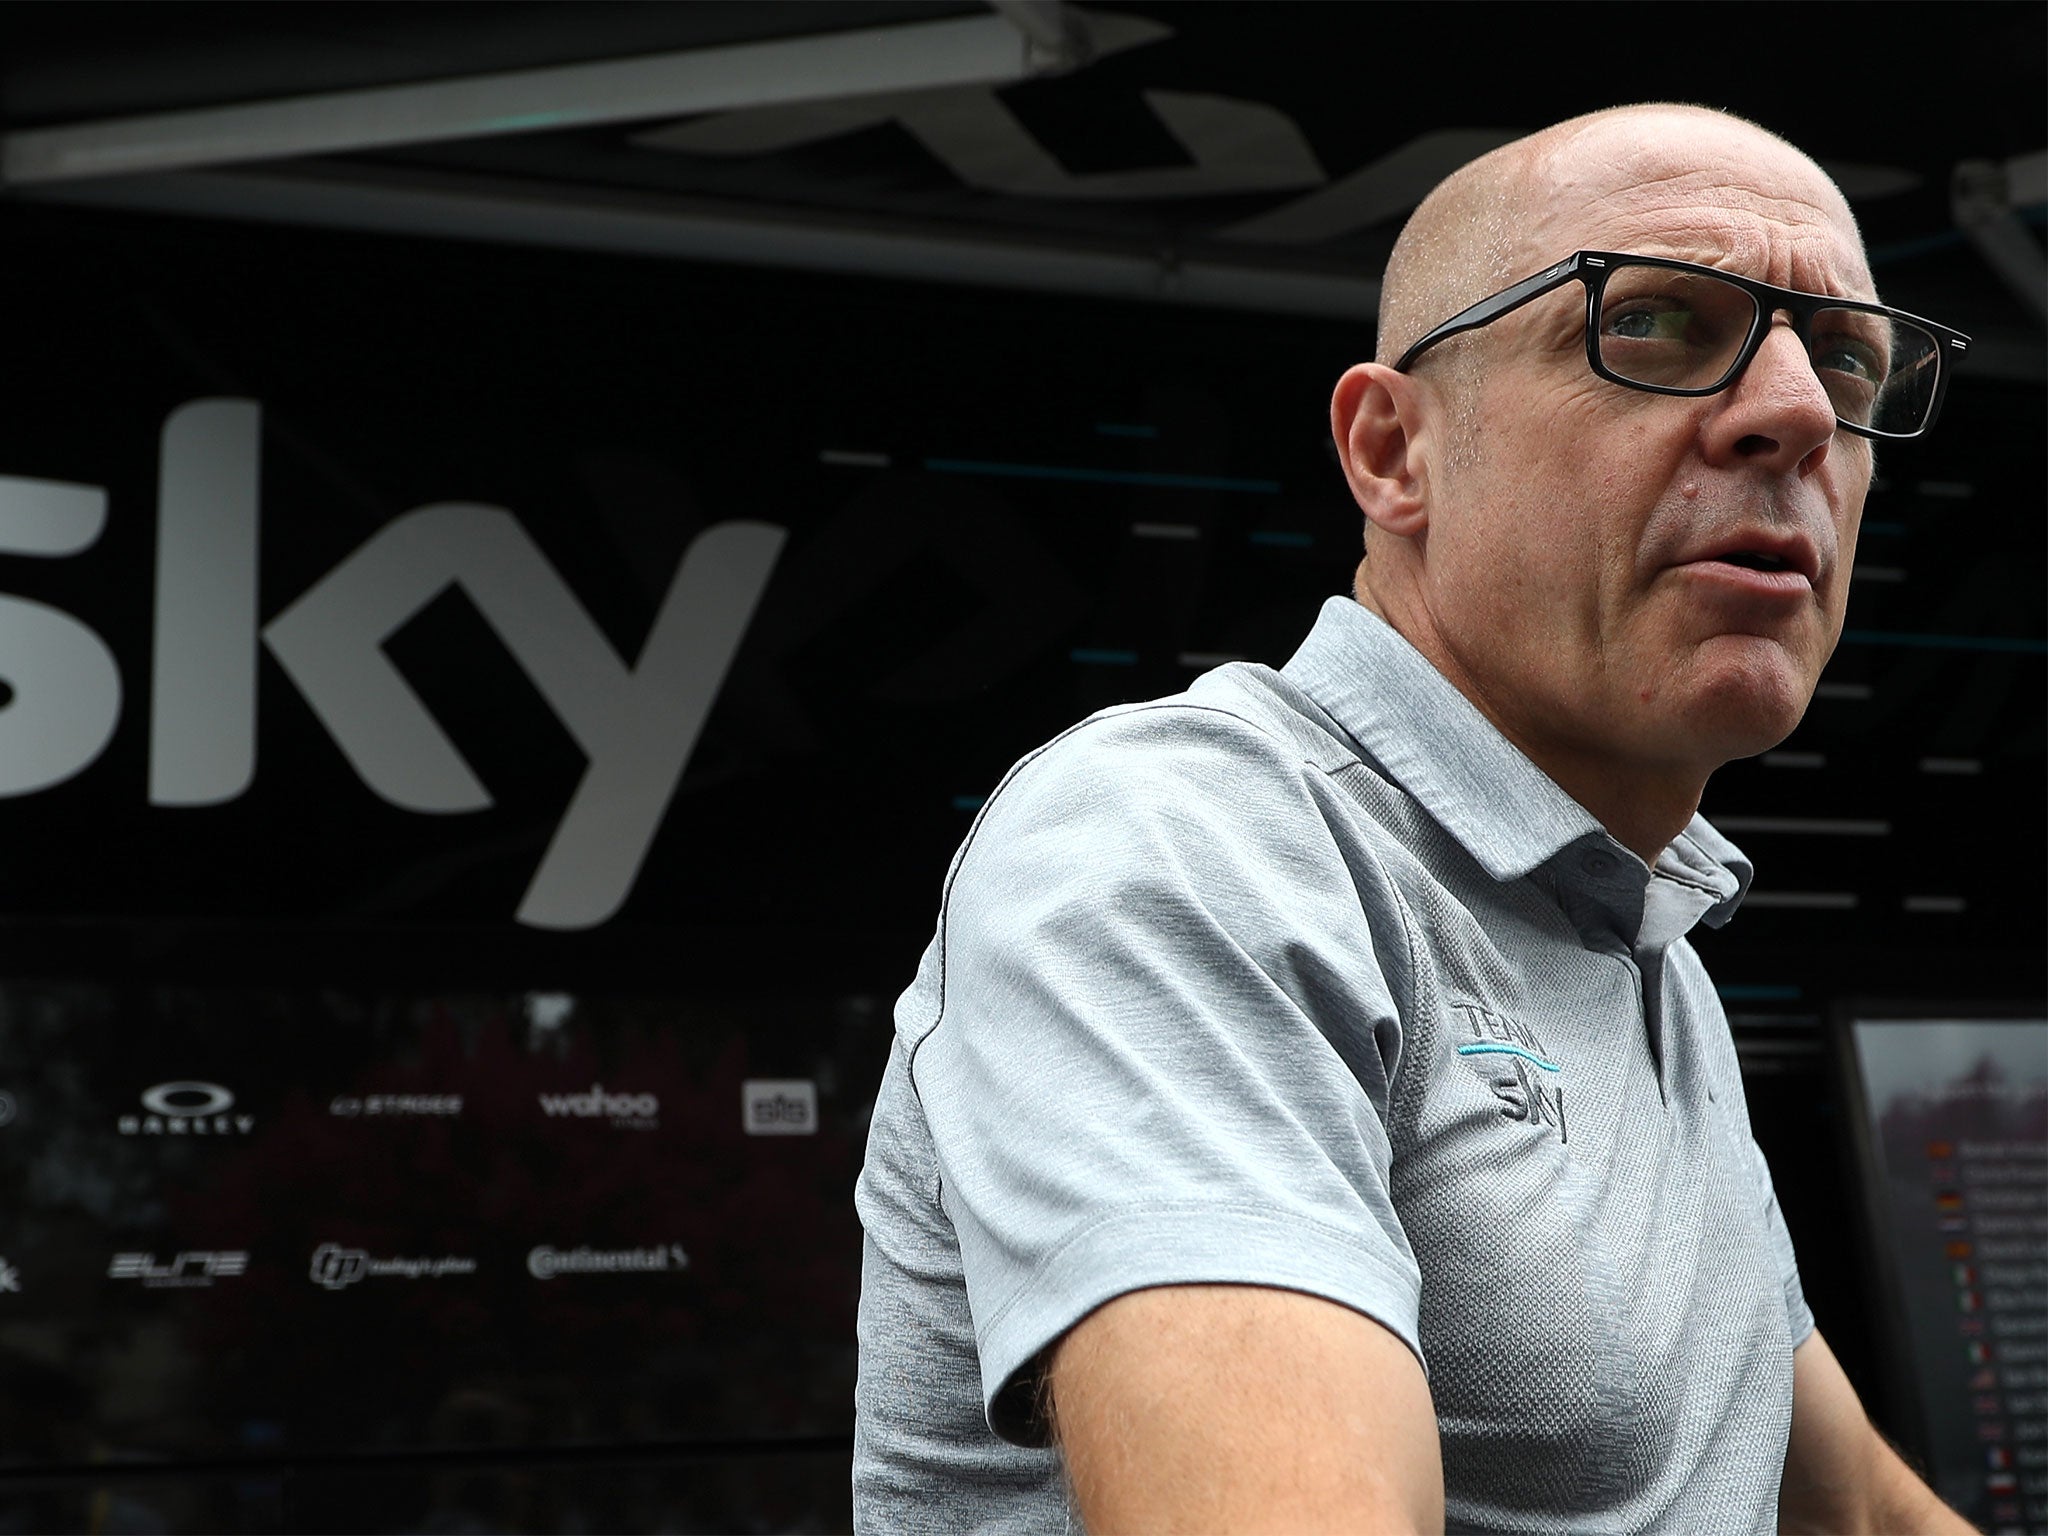 Dave Brailsford's difficult year is getting no easier